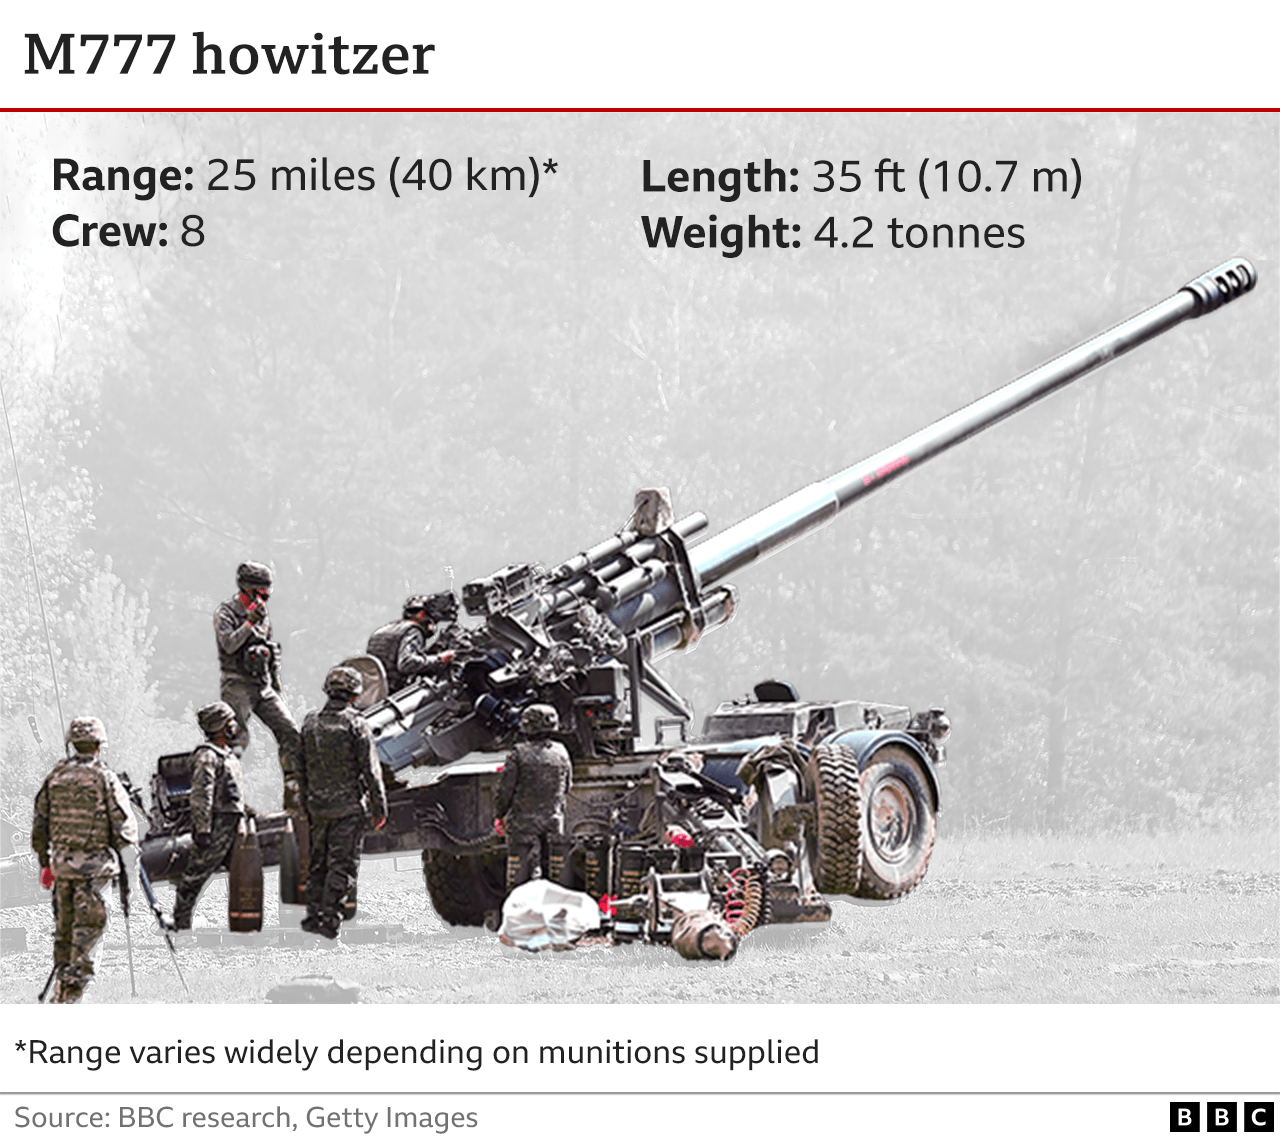 Graphic on M777 artillery